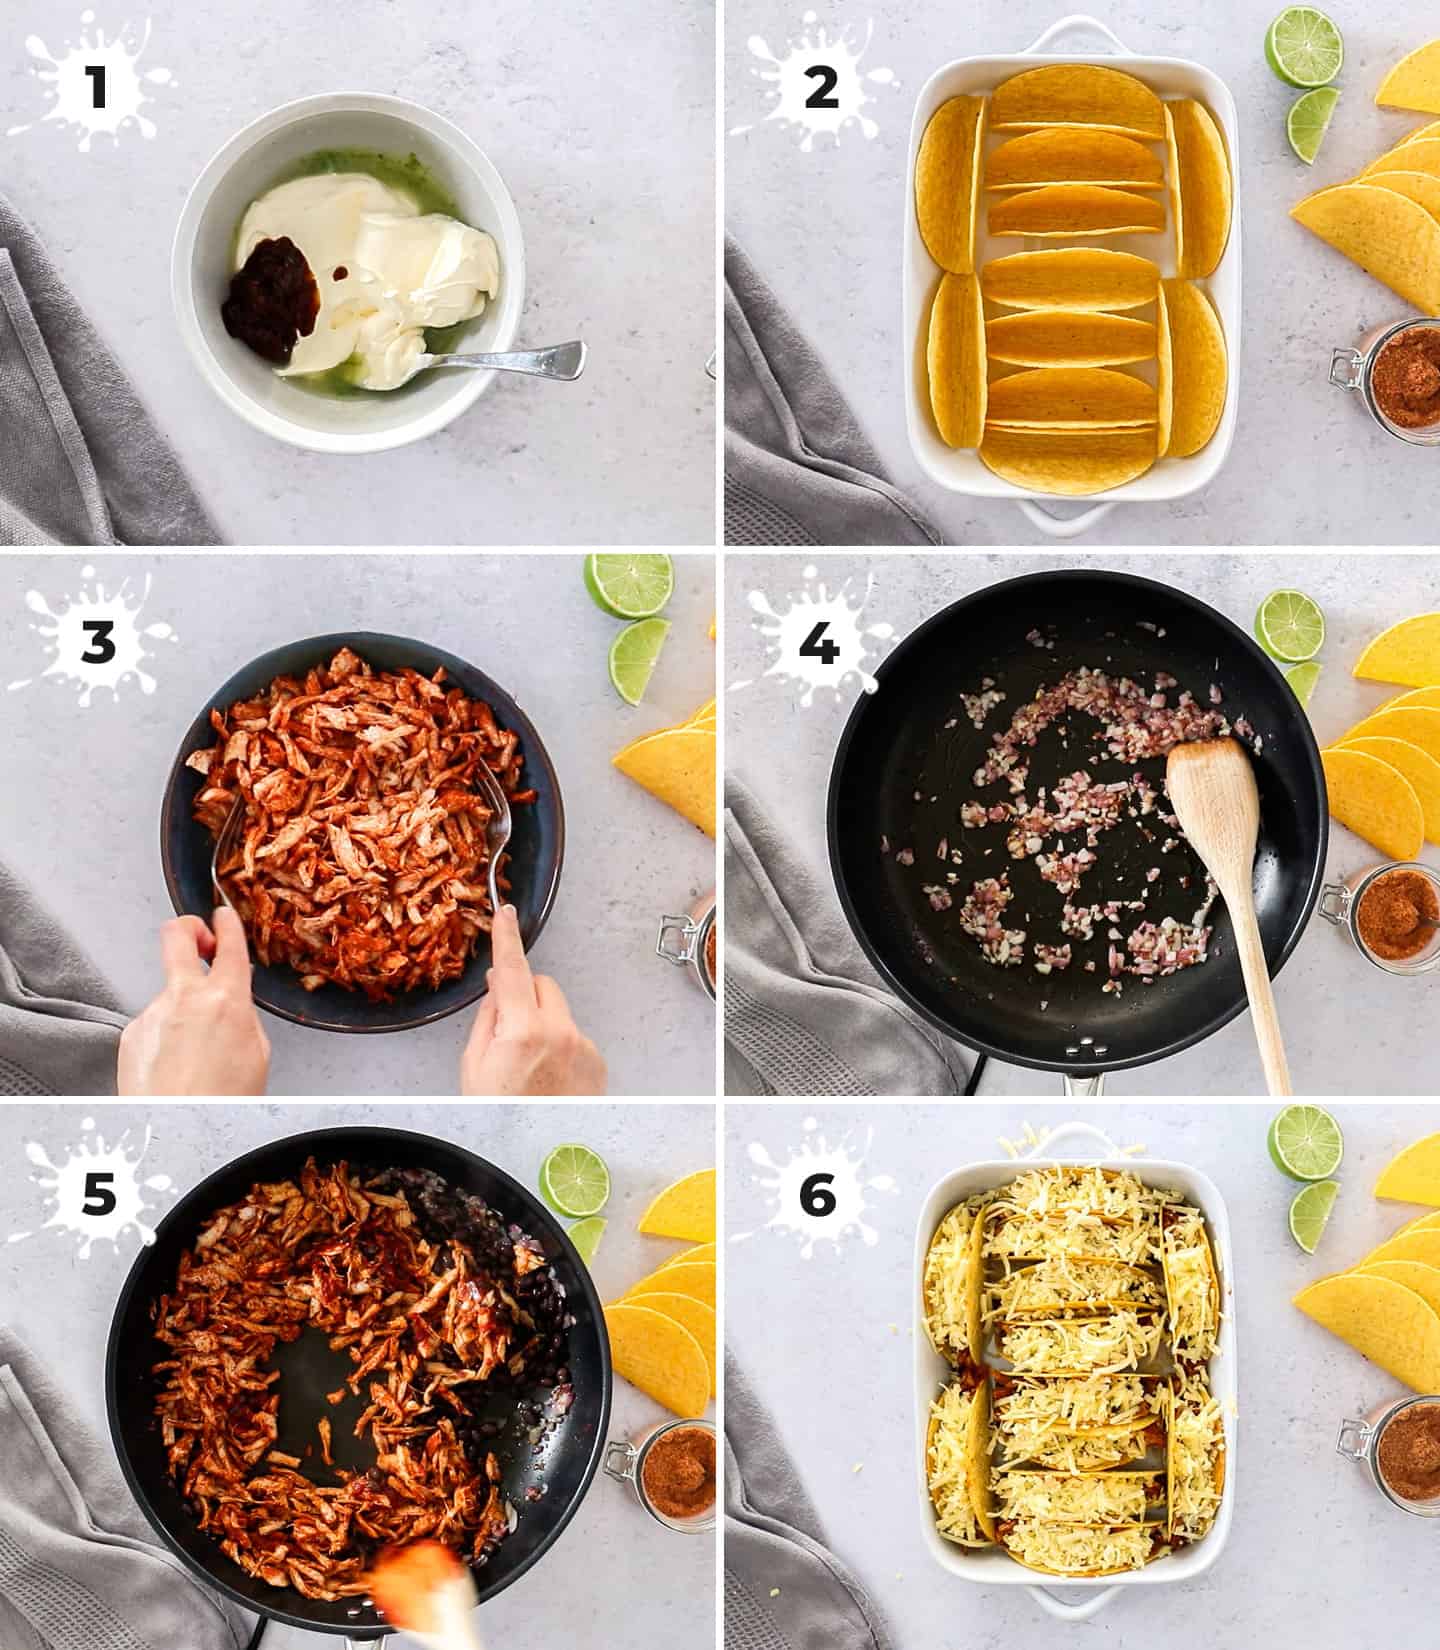 A collage of 6 images showing the steps to making baked chicken tacos.